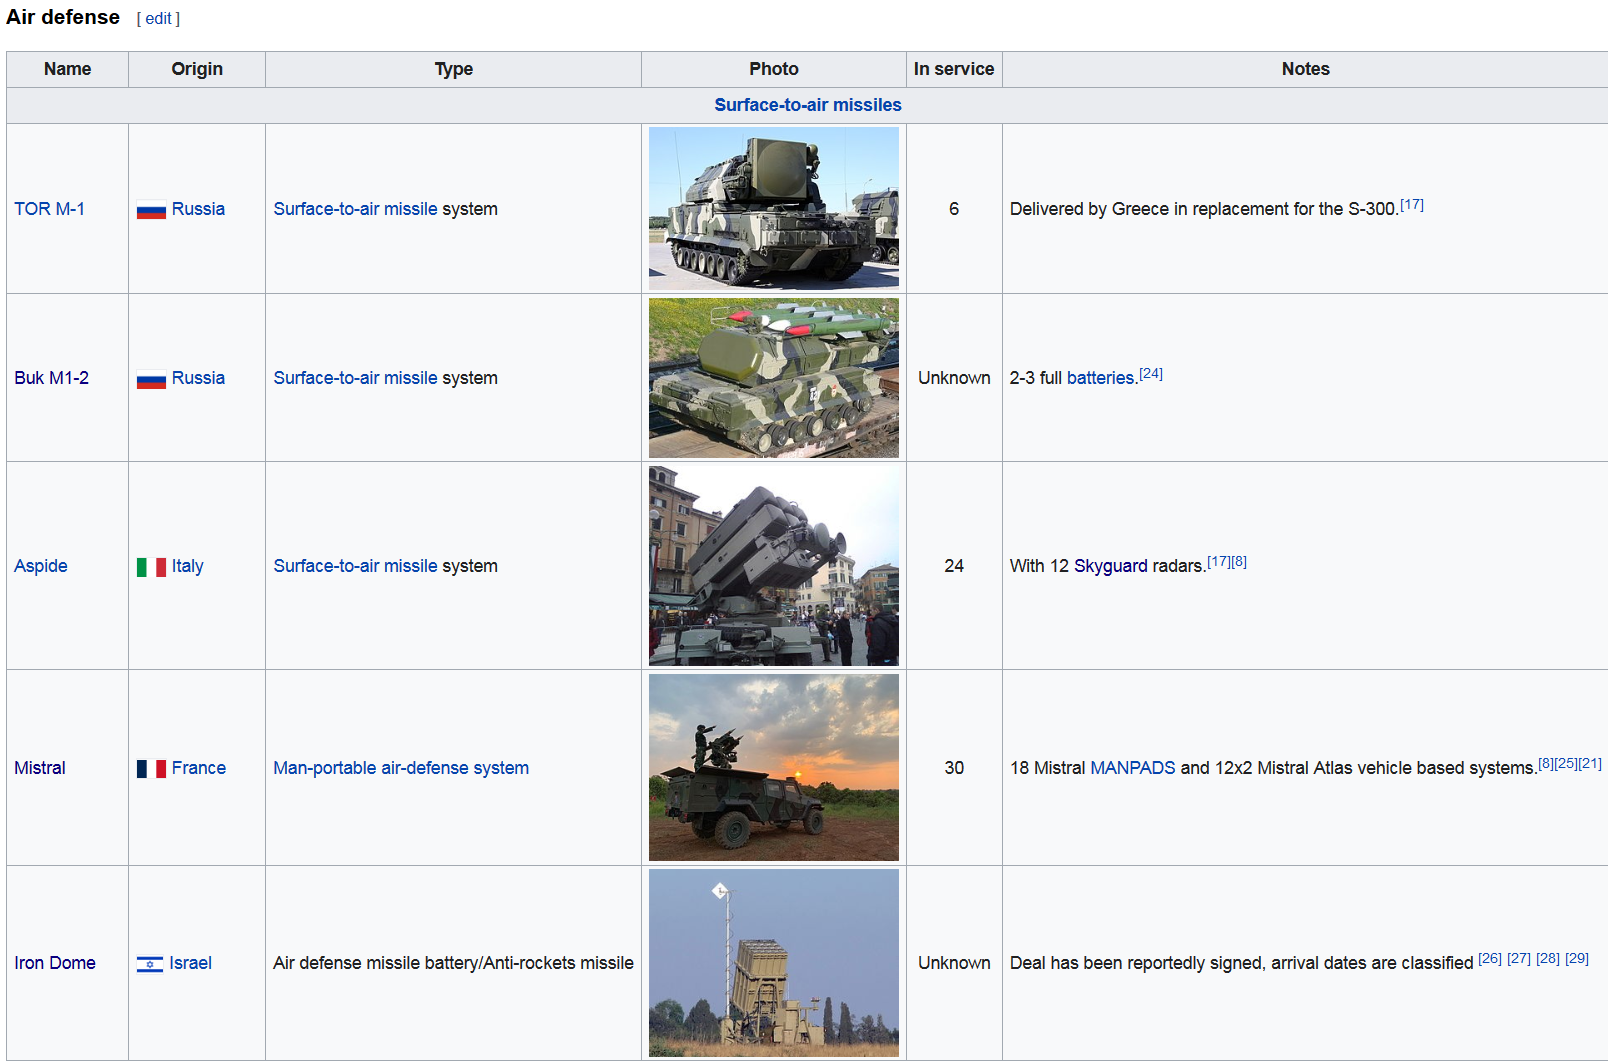 Screenshot_2022-08-22 List of equipment of the Cypriot National Guard - Wikipedia.png